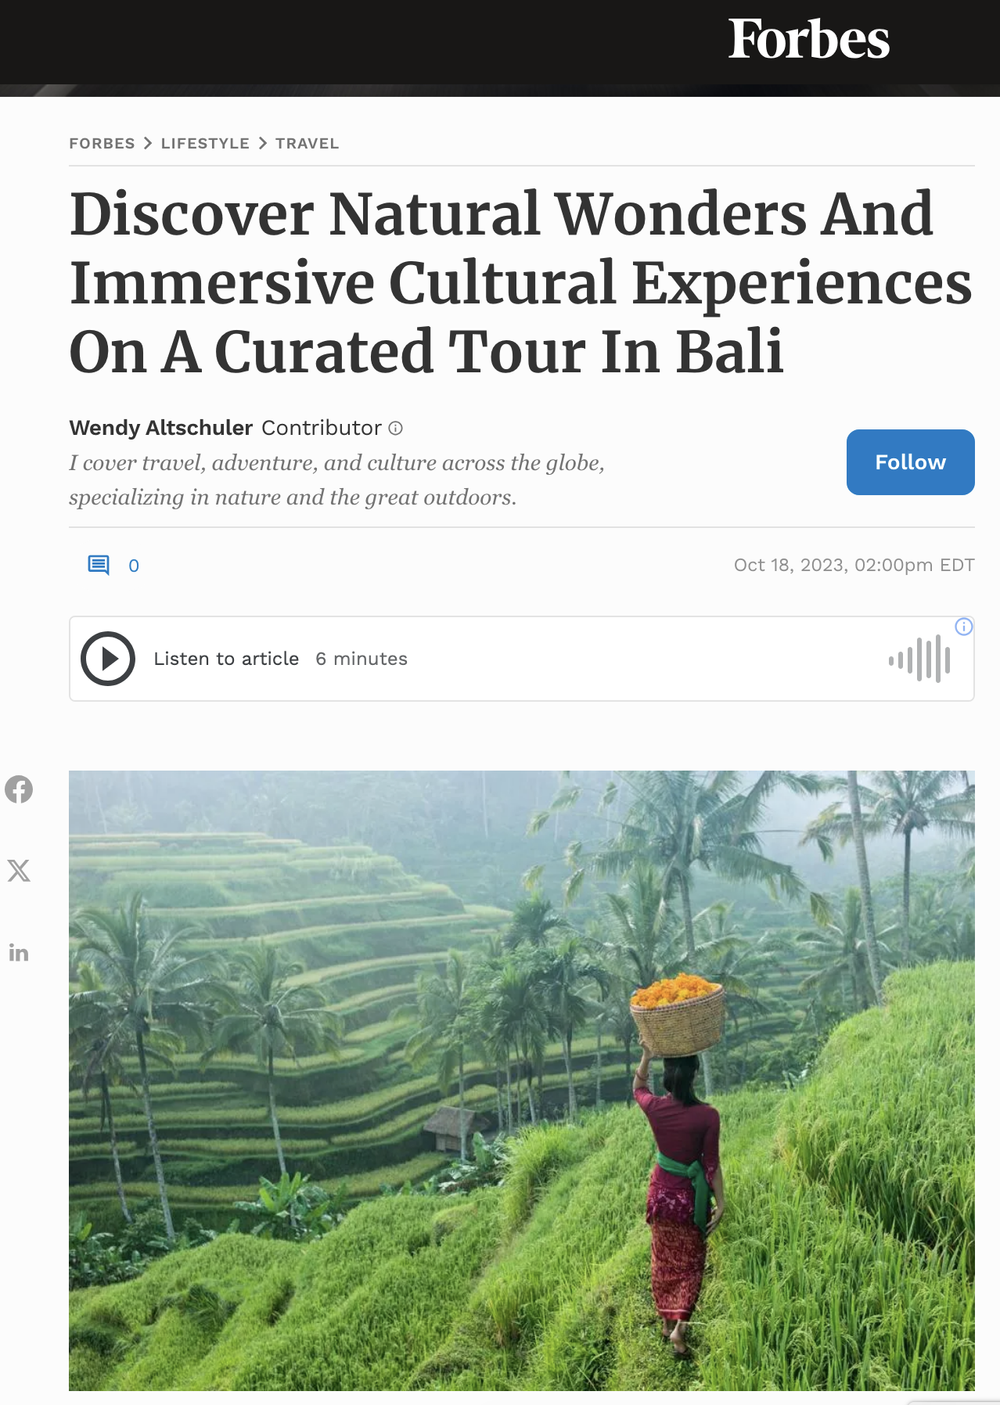 Discover Natural Wonders And Immersive Cultural Experiences On A Curated Tour In Bali